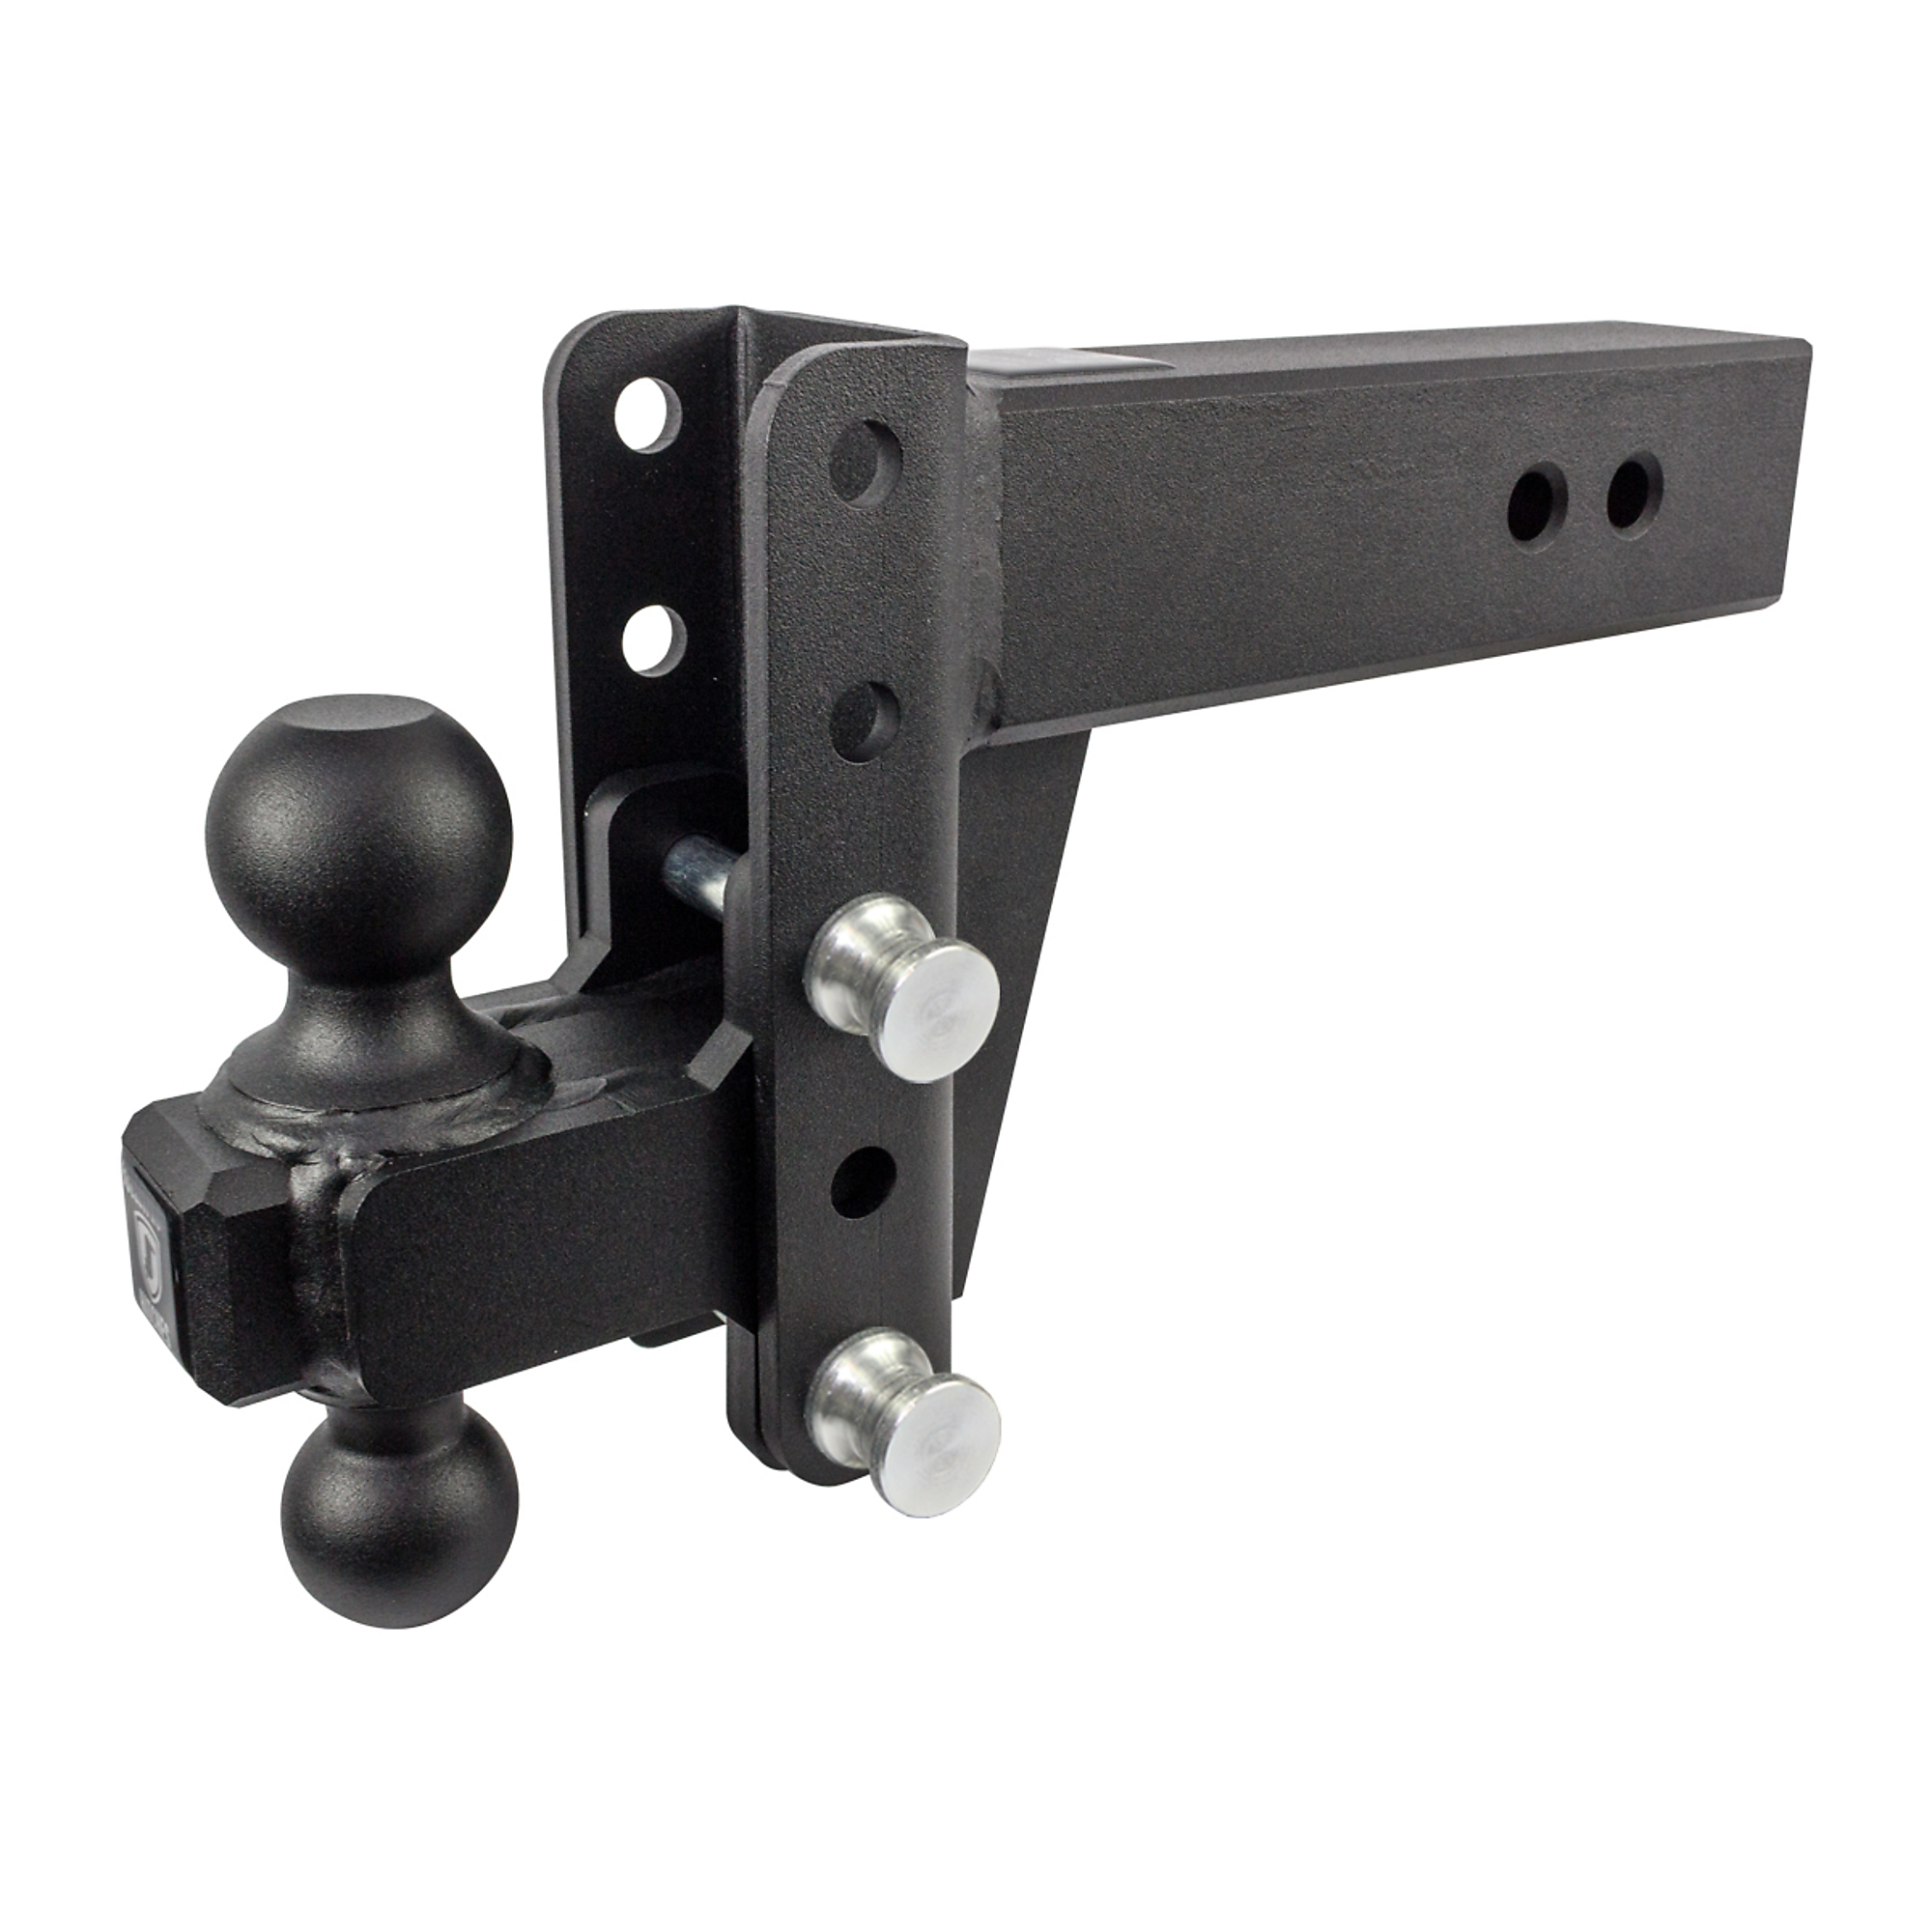 BulletProof Hitches, 3.0Inch EXTREME DUTY 4Inch DROP/RISE HITCH, Model ED304